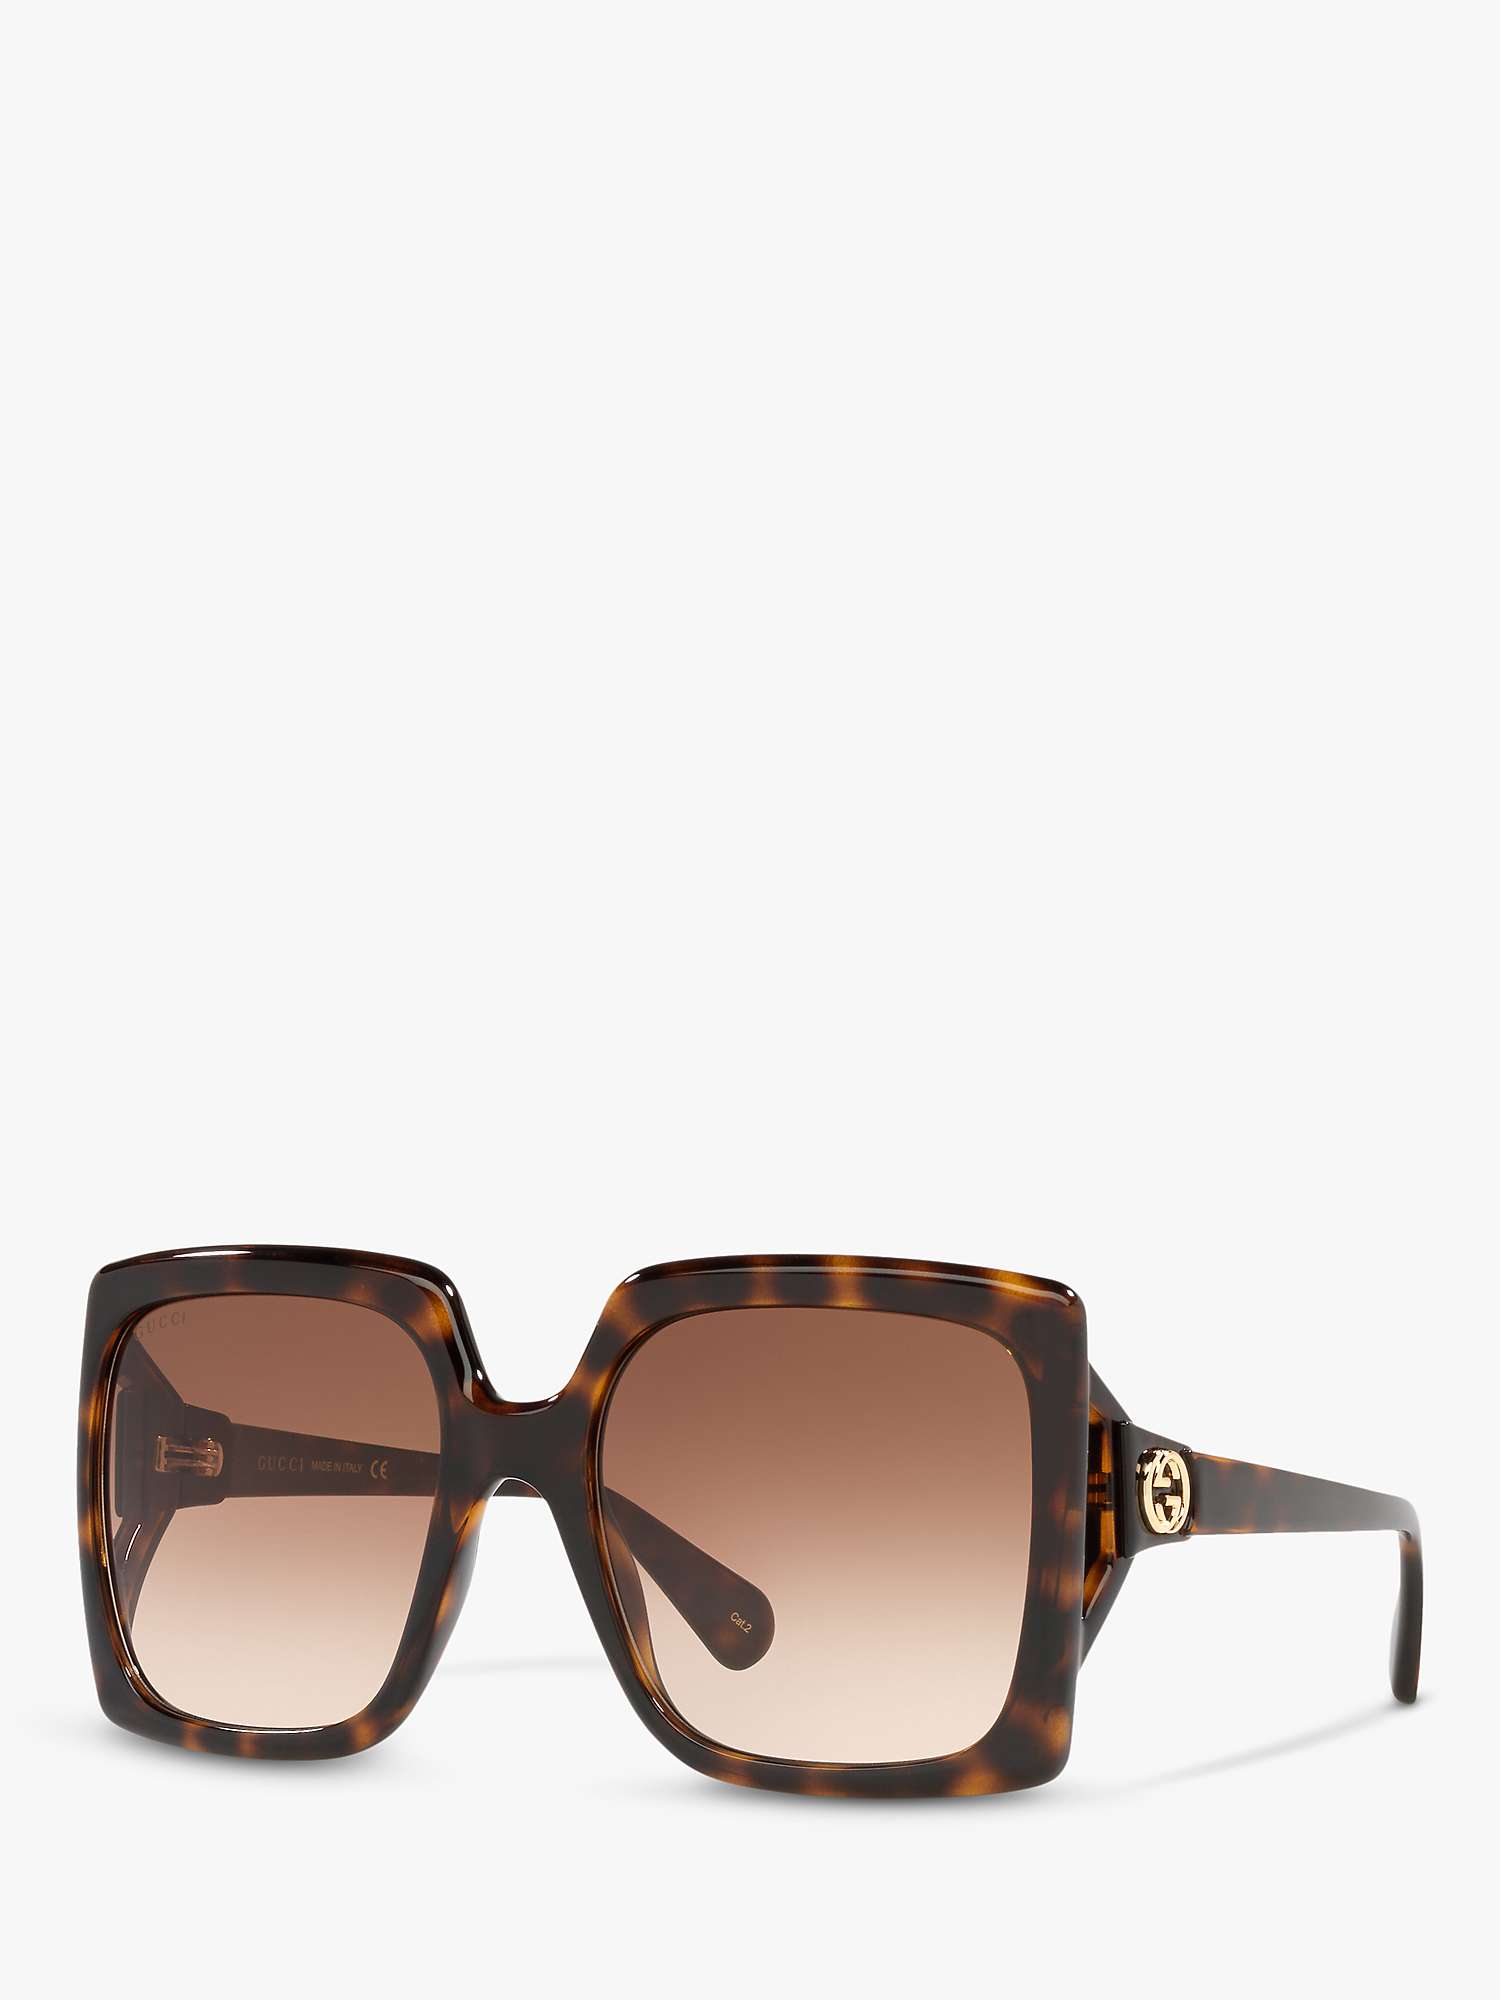 Buy Gucci GG0876S Women's Chunky Square Sunglasses Online at johnlewis.com